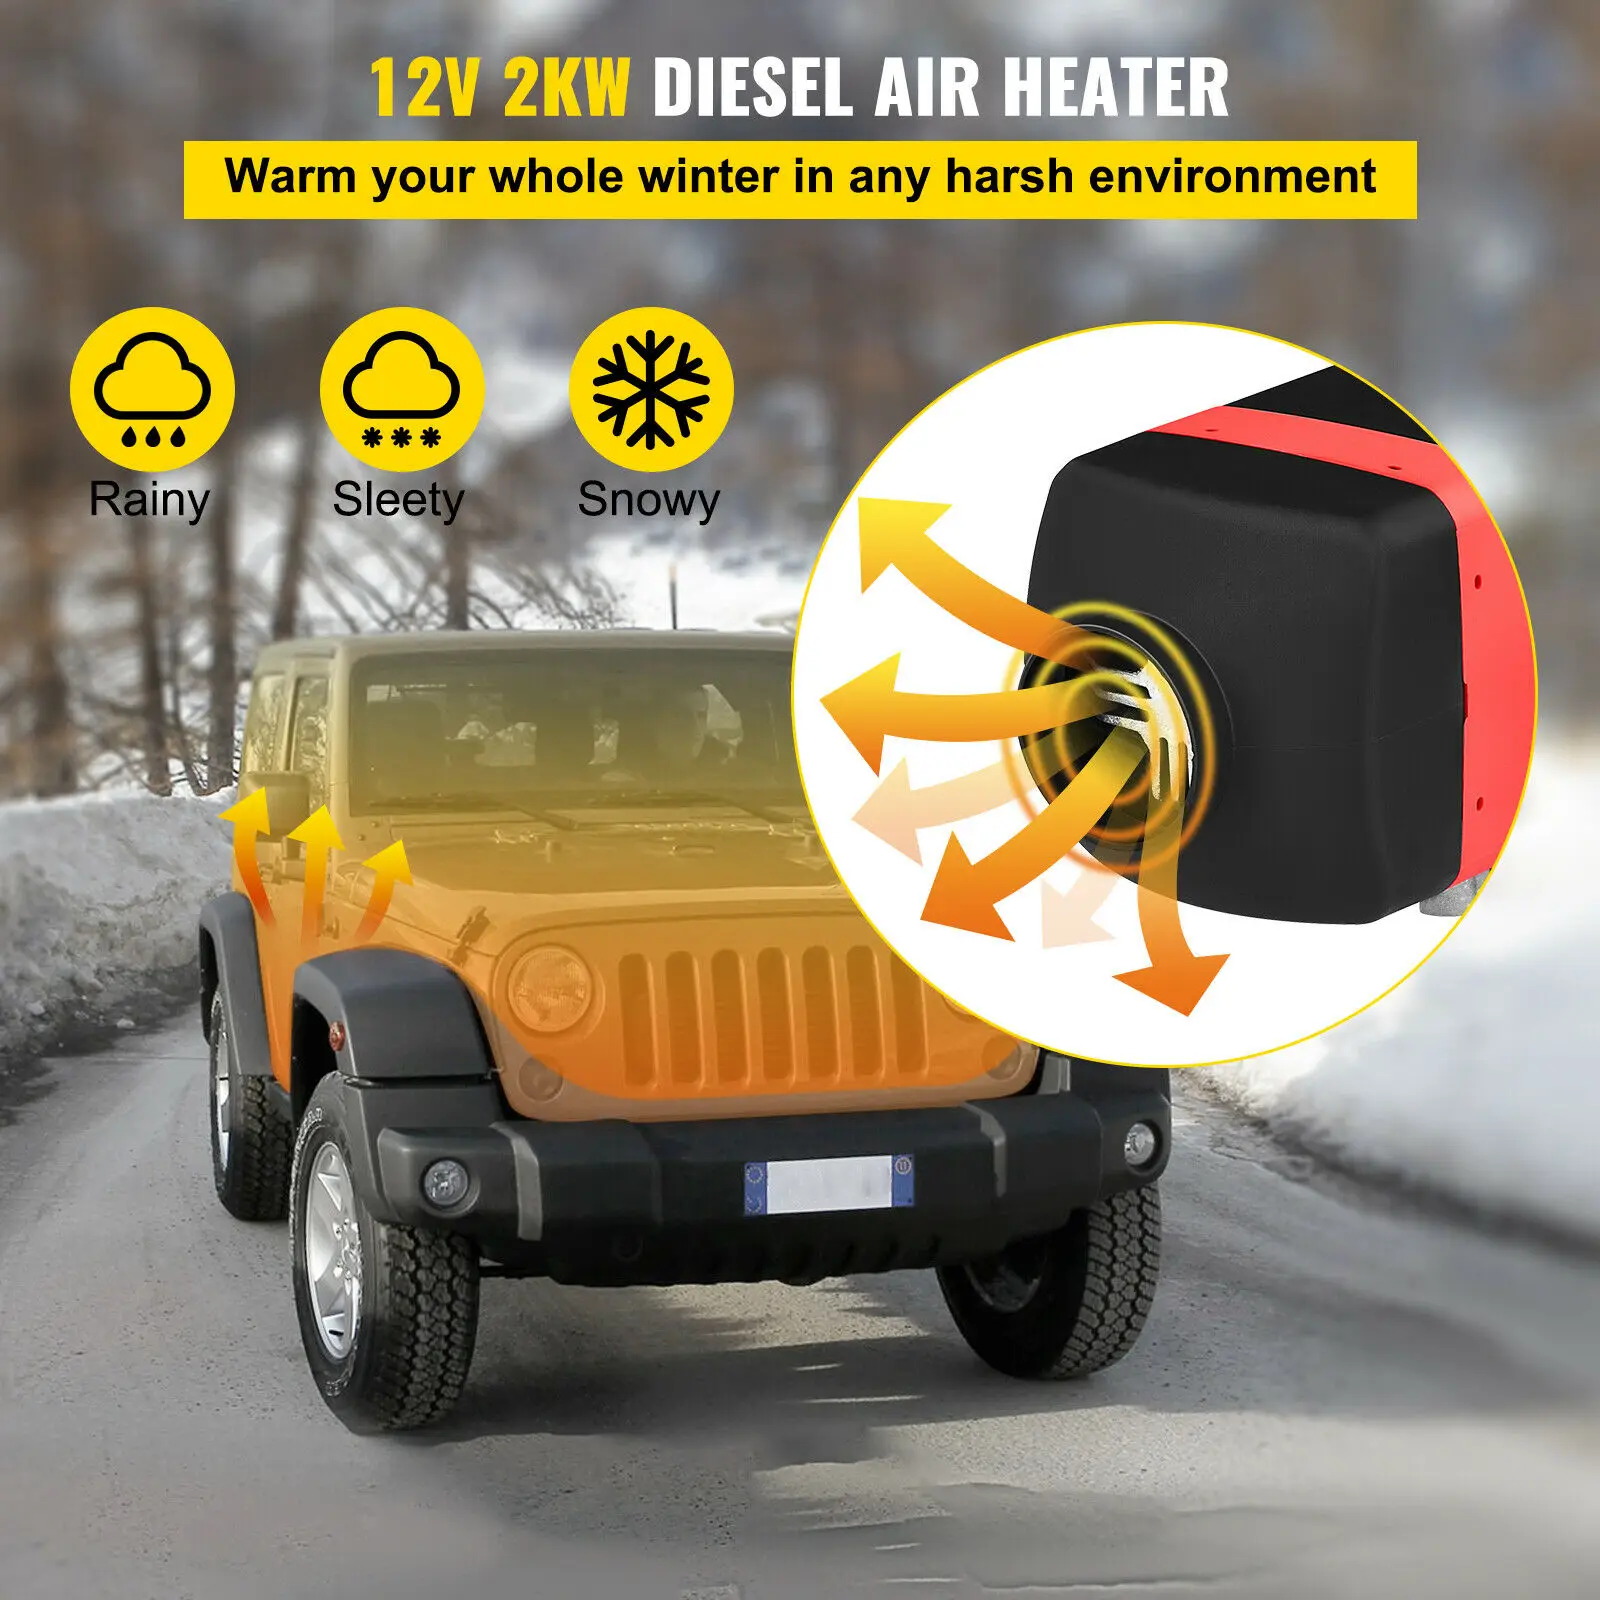 Chauffage Diesel Air Heater 2KW 12V avec Silencieux LCD Thermostat Camion